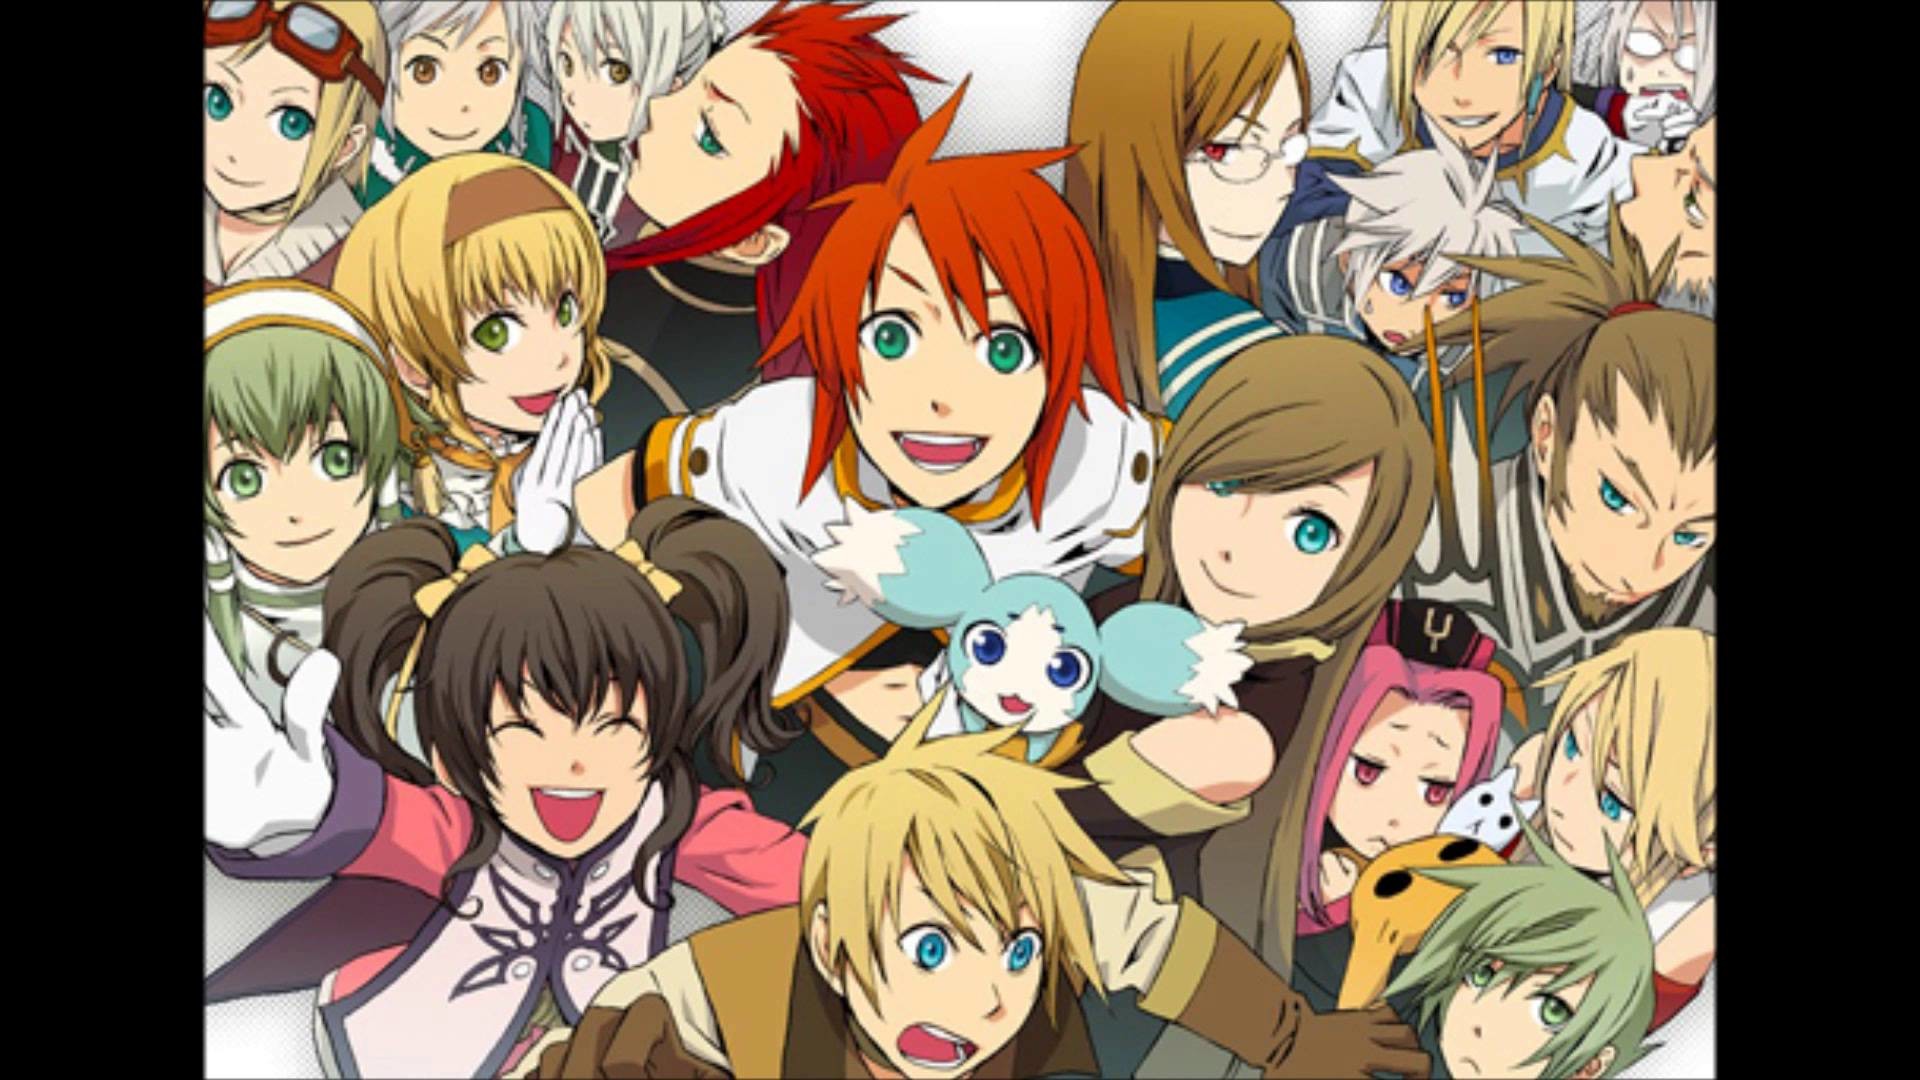 1920x1080 High Resolution Wallpaper | Tales Of The Abyss  px